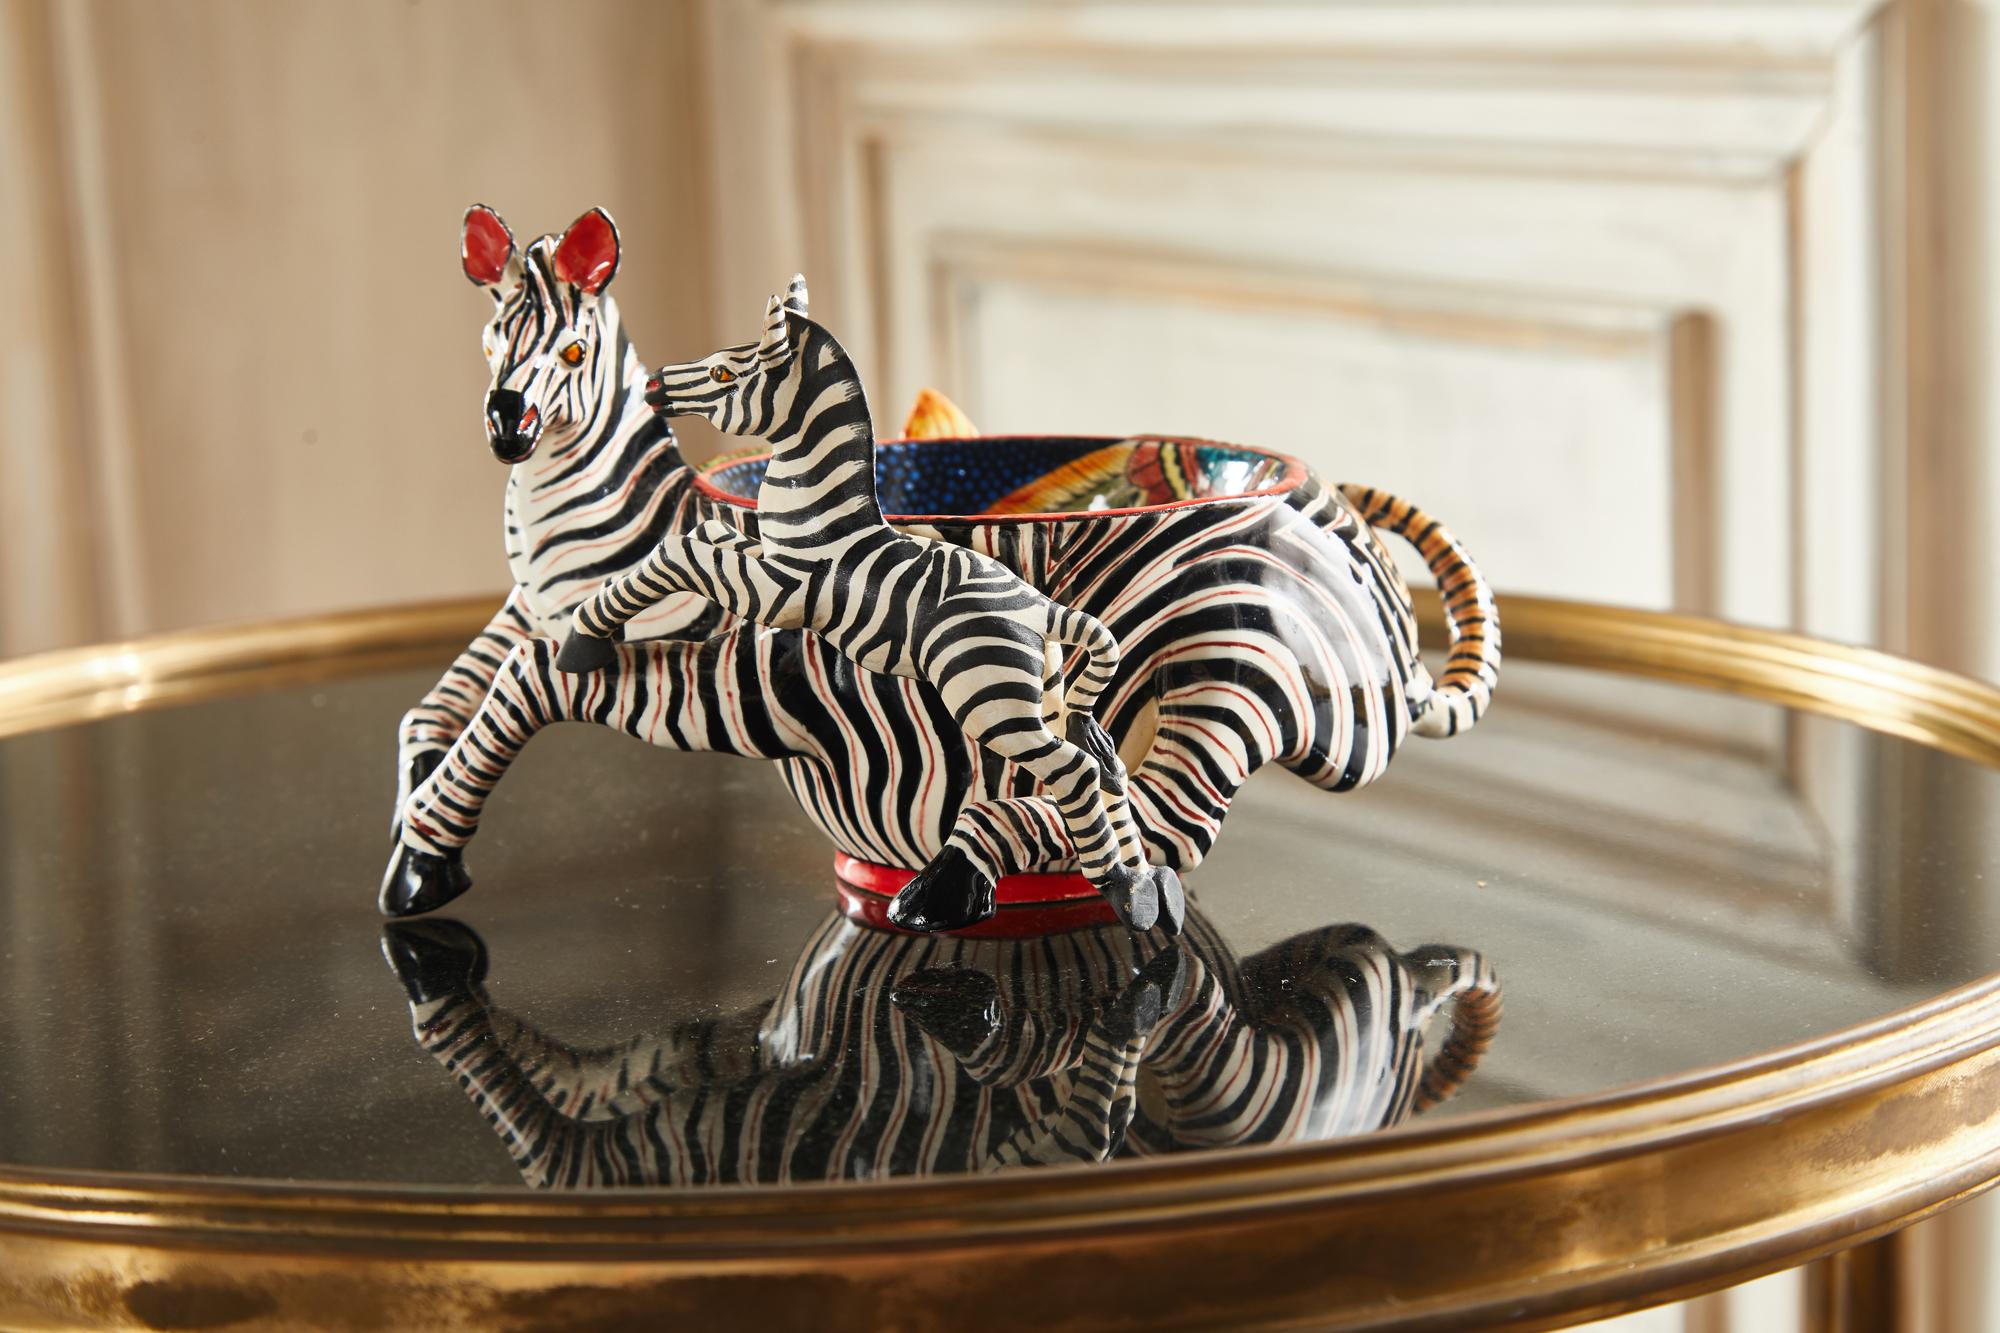 The black, white, and red Zebras are alluring to any perception of beauty. The somersaulting forms, red notes, and vibrant flower design create the authenticity of a timeless piece. A decorative bowl or tray piece perfect for any room.

The mystical